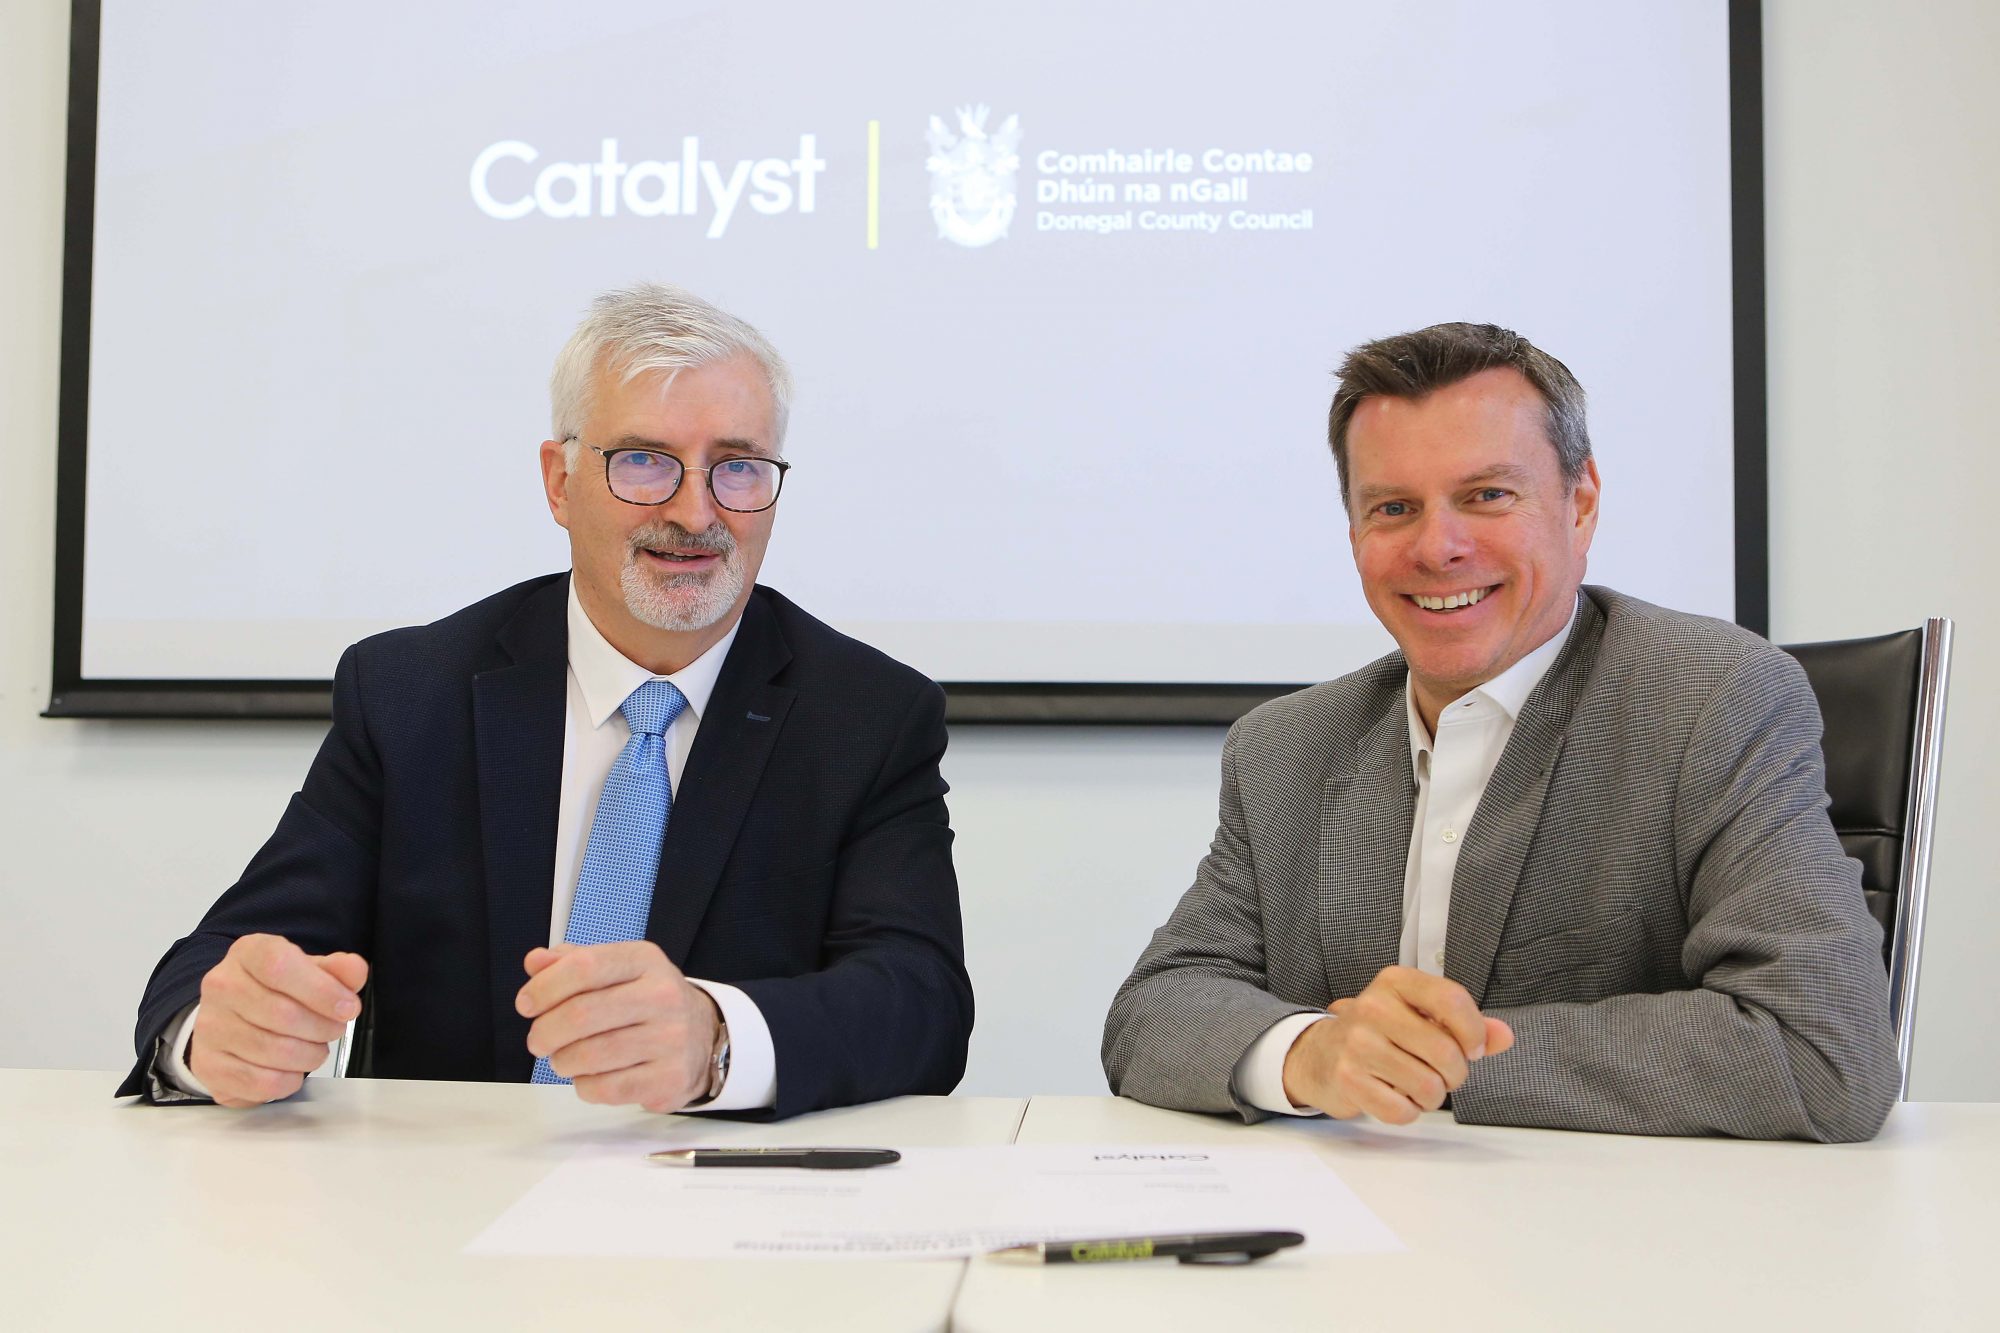 Catalyst signs Memorandum of Understanding with Donegal County Council